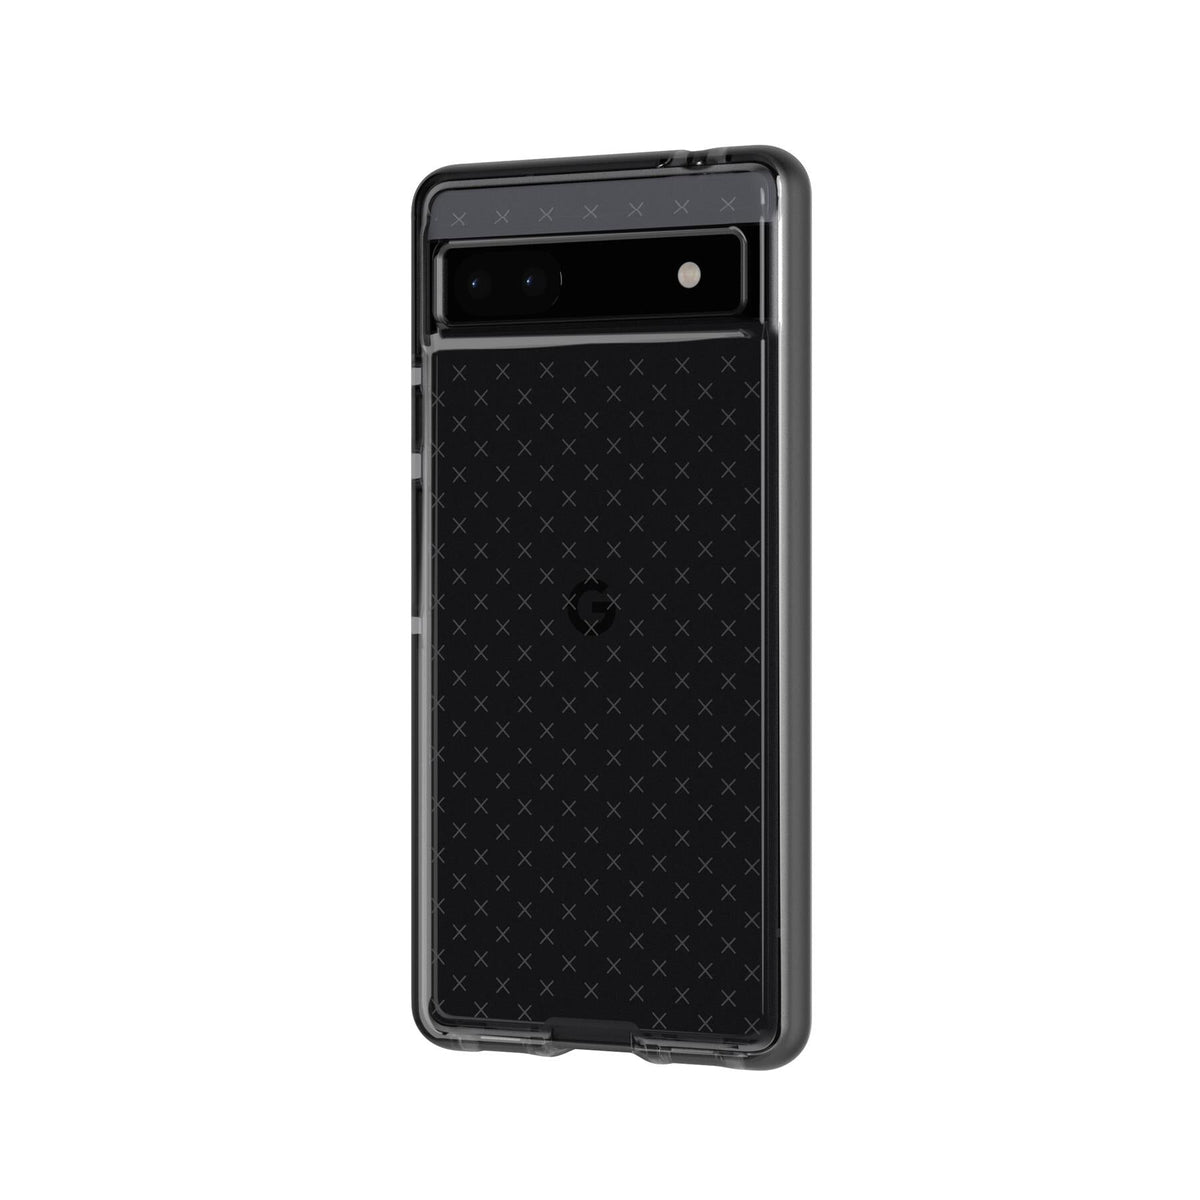 Tech21 T21-9488 mobile phone case for Google Pixel 6a in Black